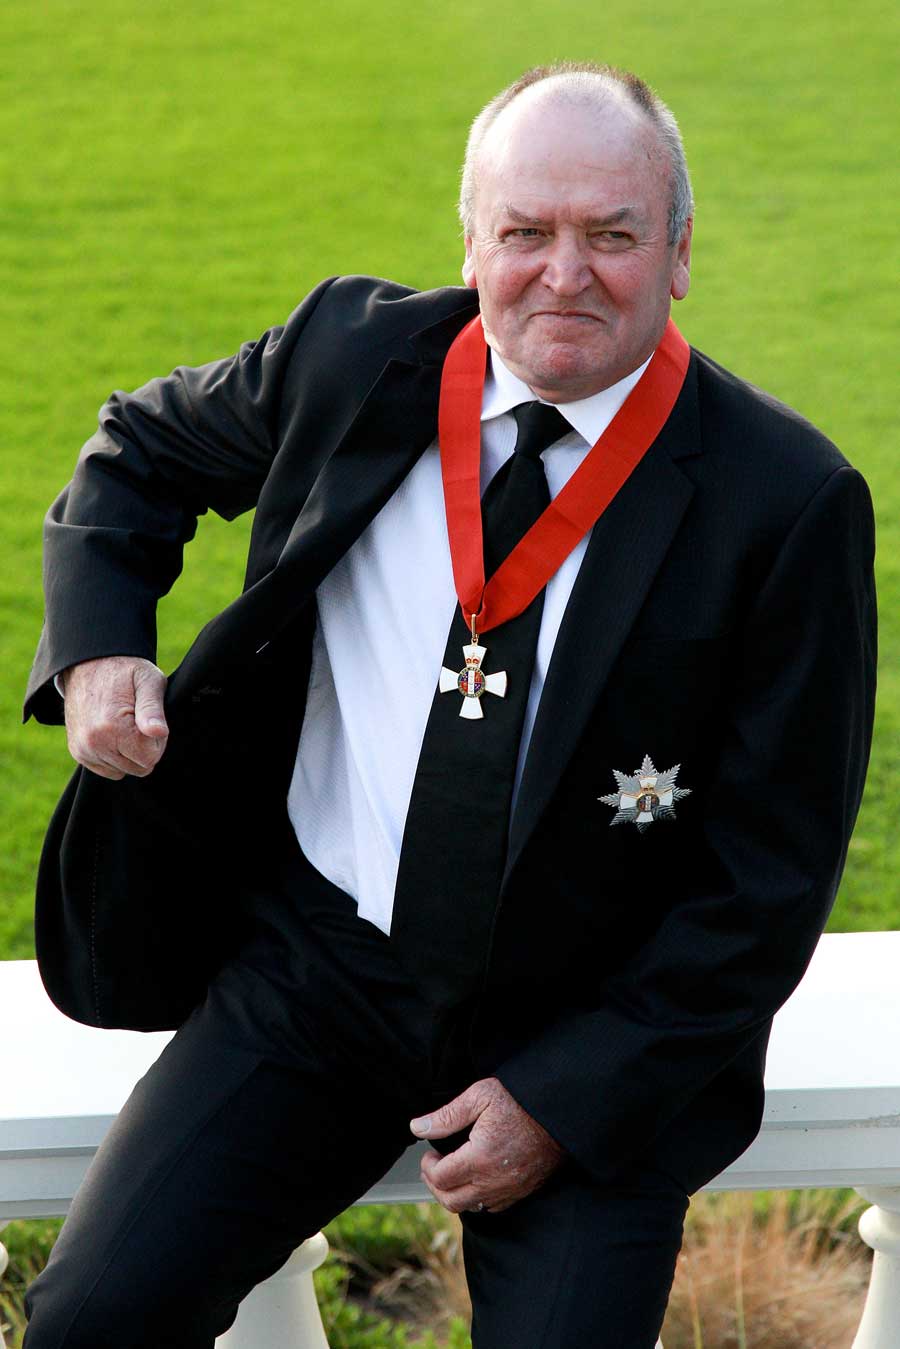 Sir Graham Henry on the day he received his knighthood